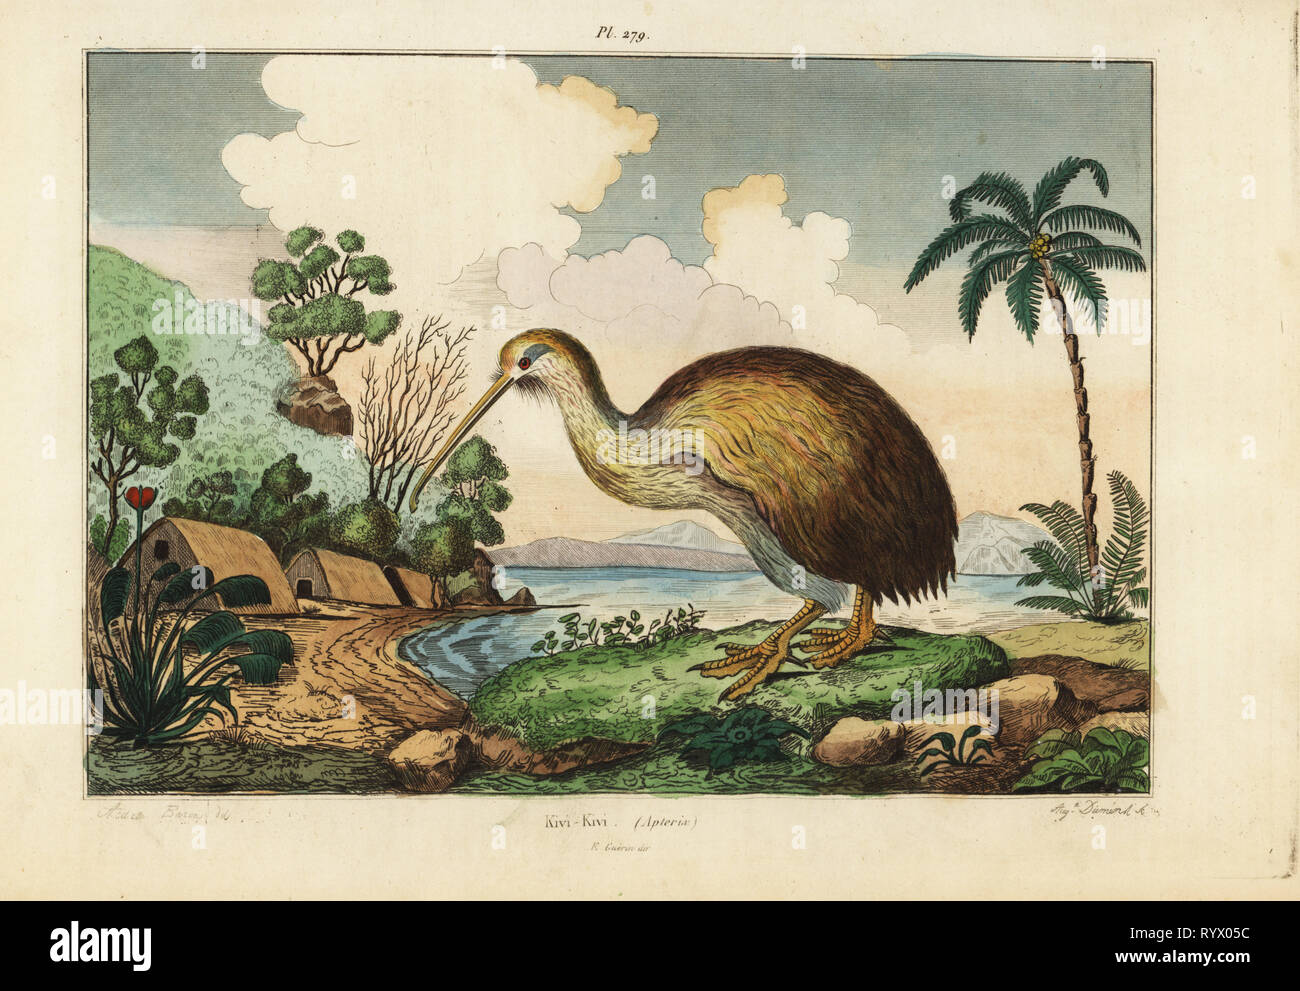 Kiwi bird, Apteryx australis. Handcoloured steel engraving by August Dumenil after an illustration by A. Carie Baron from Felix-Edouard Guerin-Meneville's Dictionnaire Pittoresque d'Histoire Naturelle (Picturesque Dictionary of Natural History), Paris, 1834-39. Stock Photo